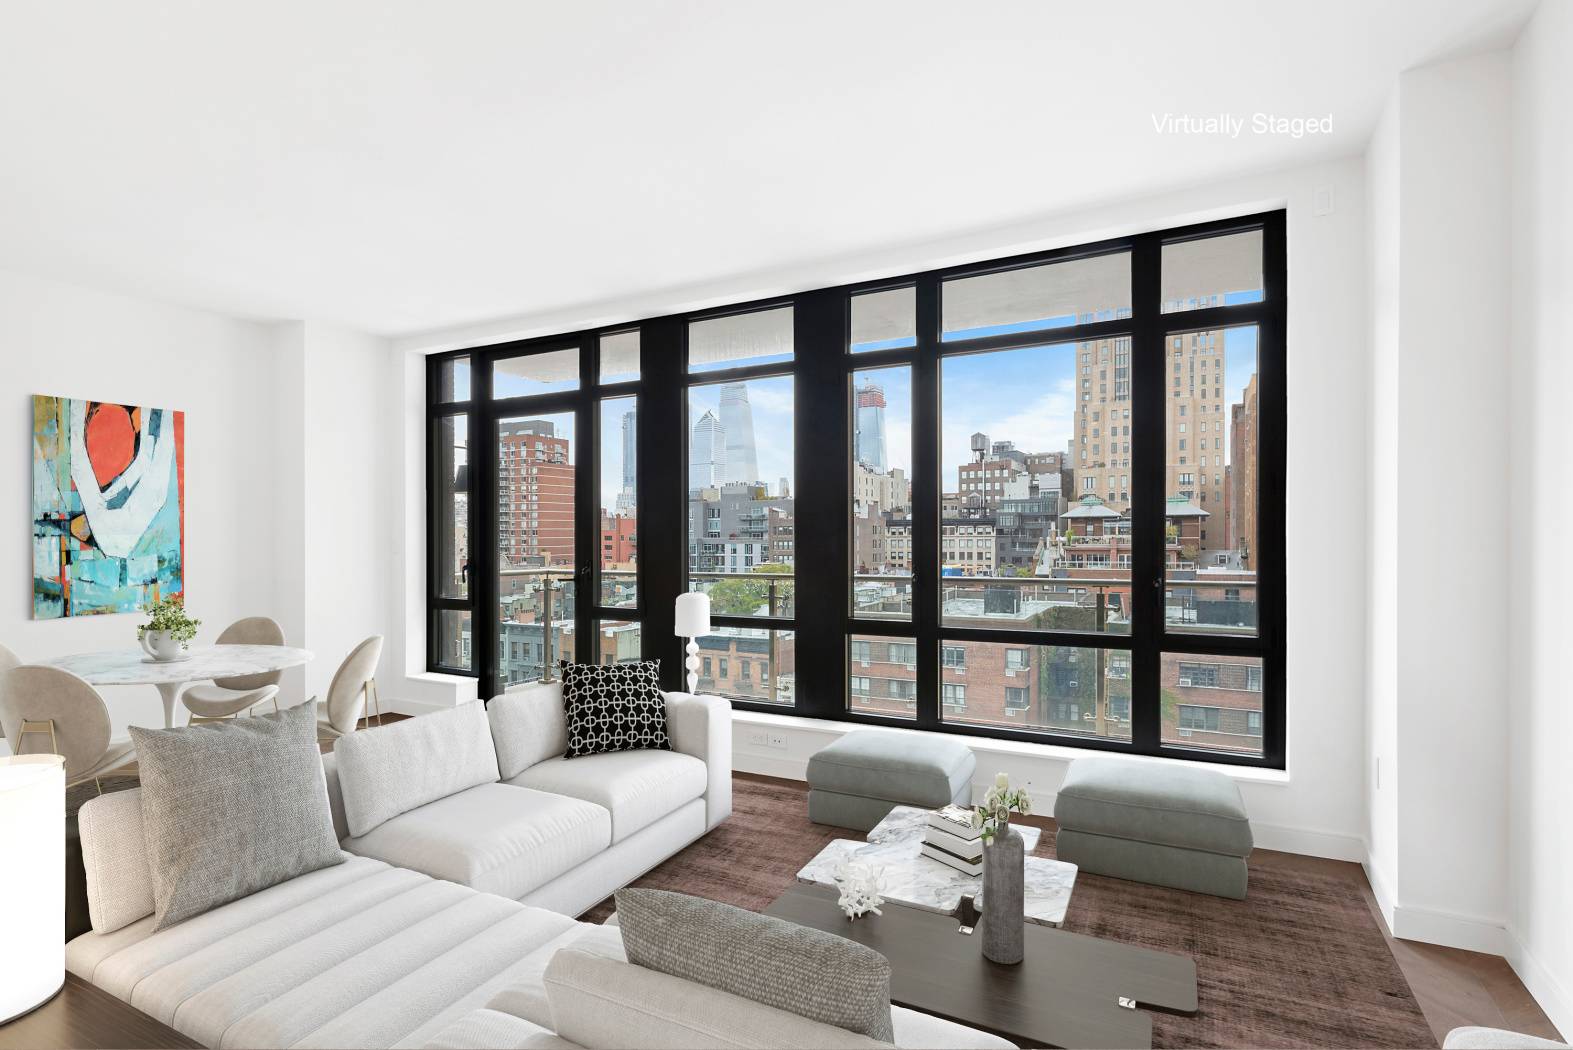 211 West 14th Street 9B is generously proportioned 2 bedroom residence, measuring at 1, 342sf, with dramatic over sized casement windows that provide gorgeous Northern light with cascading views over ...